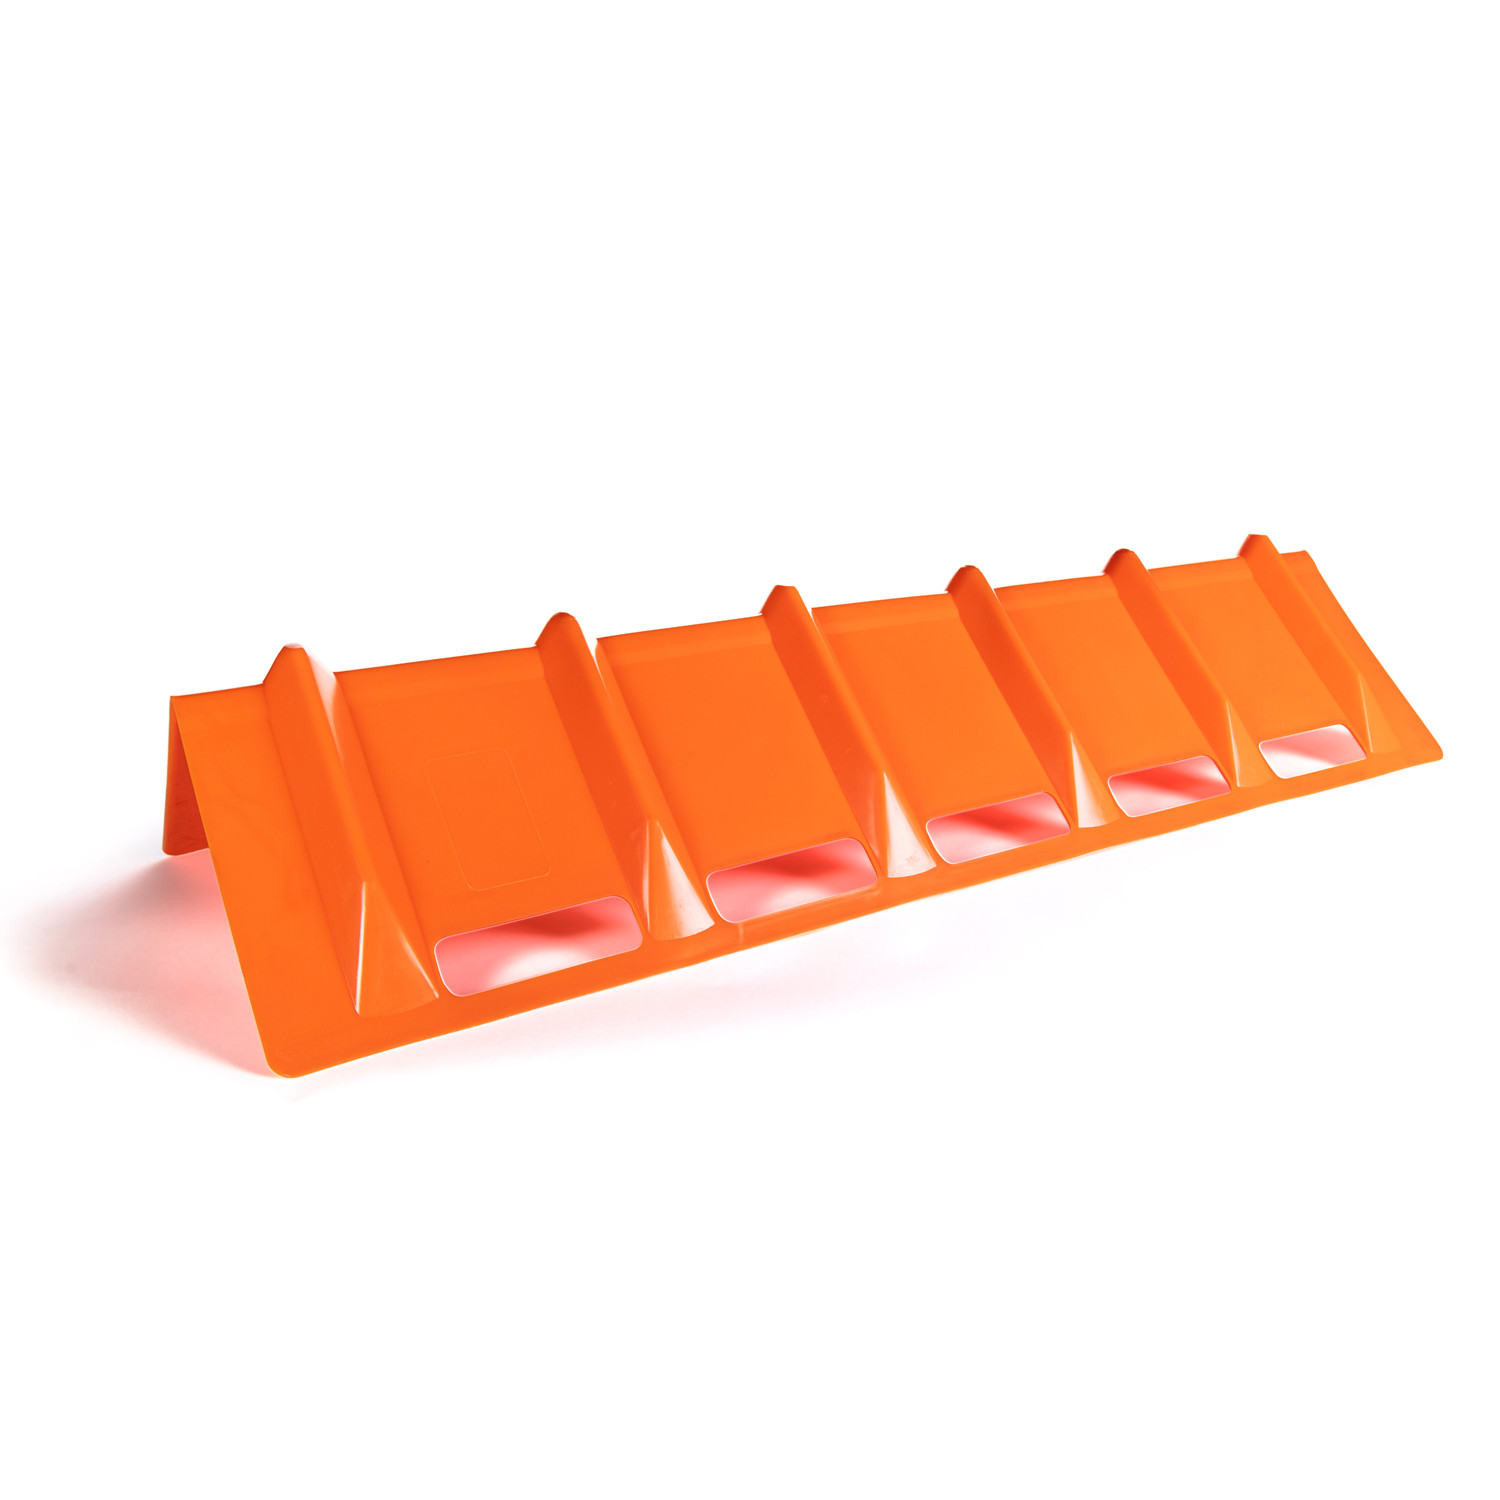 36 x 8 x 8 Reinforced Plastic Edge Protector for Tie Downs and Lashing  buy in stock in U.S. in IDL Packaging